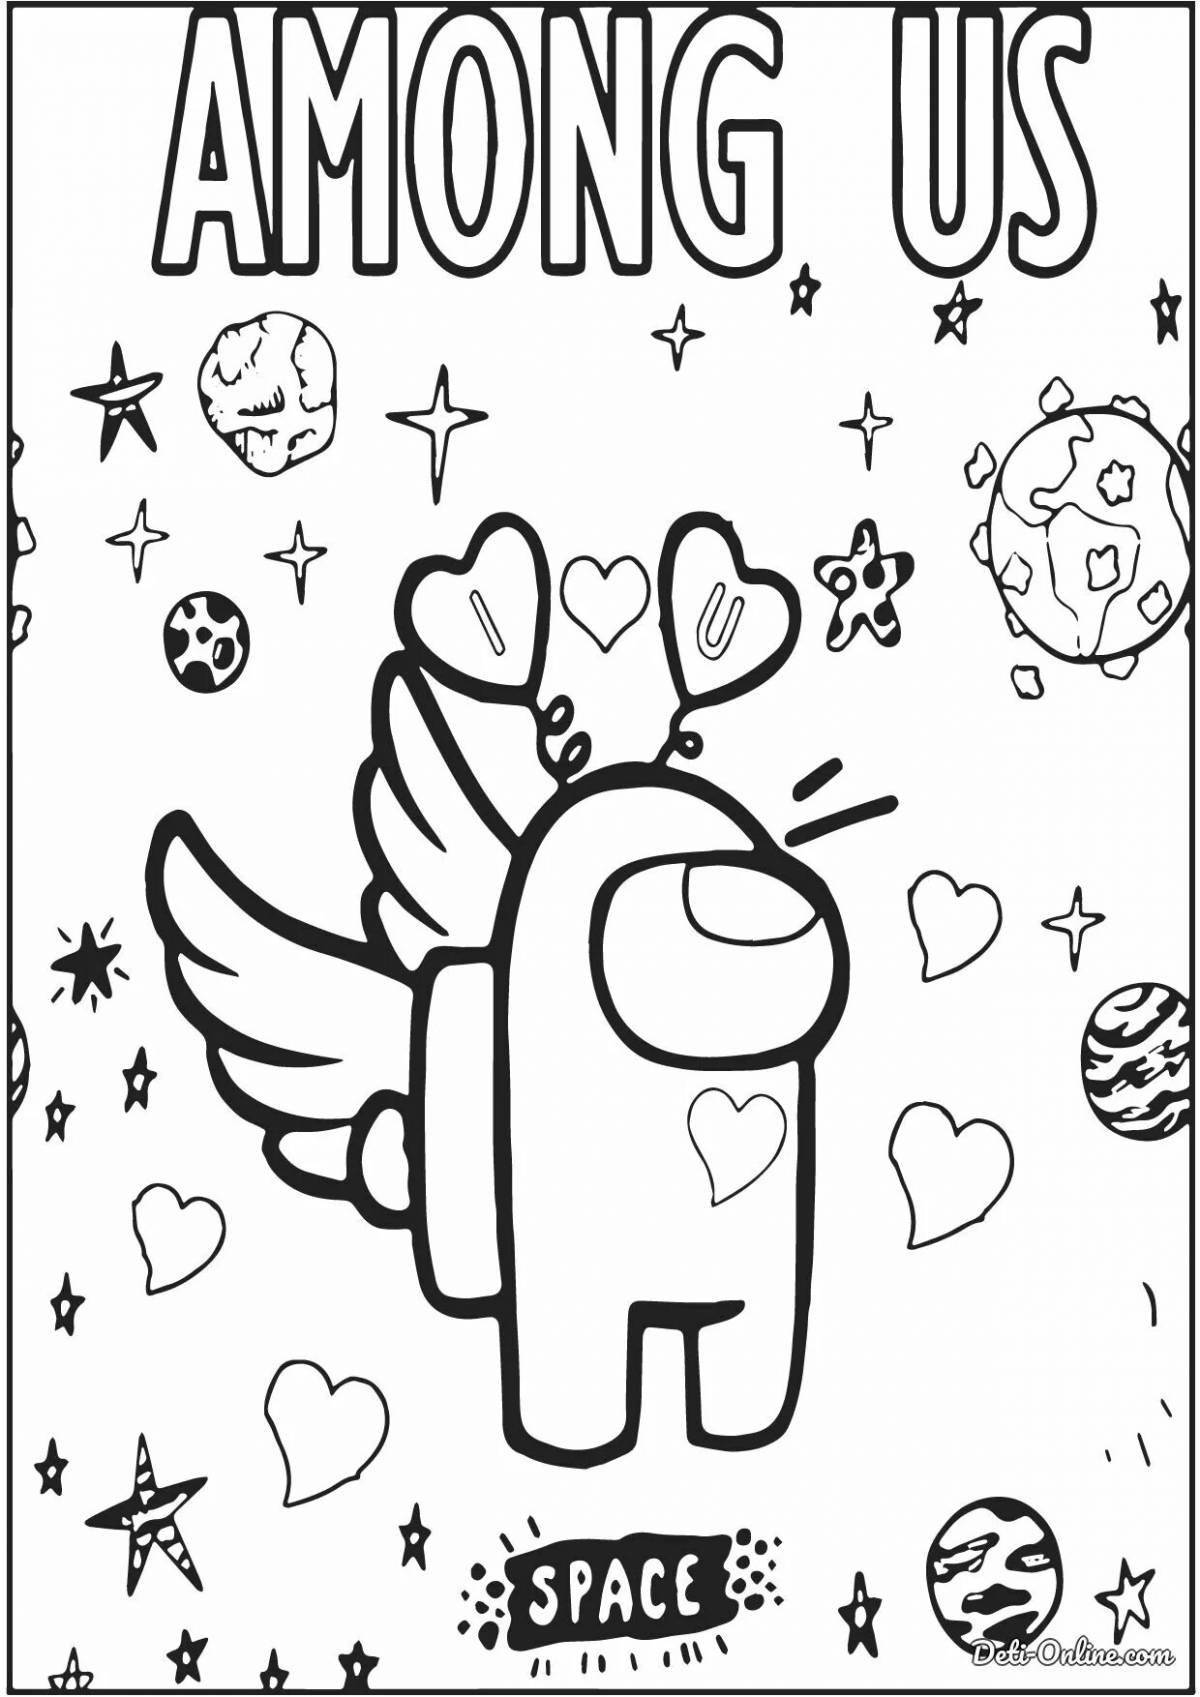 Ace cat bright coloring page